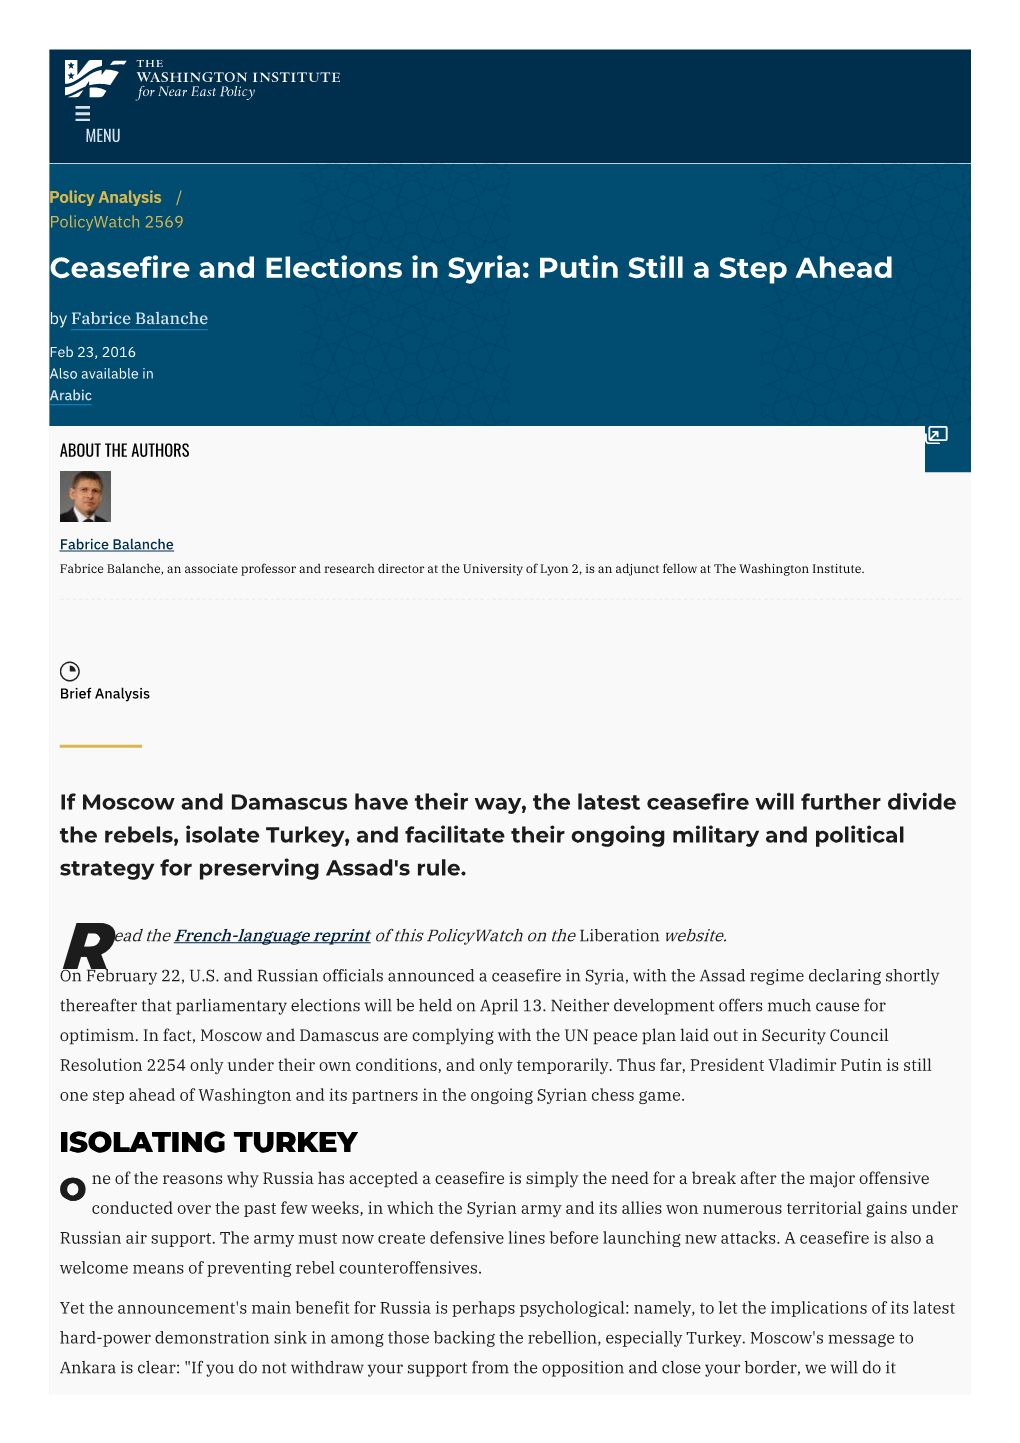 Ceasefire and Elections in Syria: Putin Still a Step Ahead by Fabrice Balanche